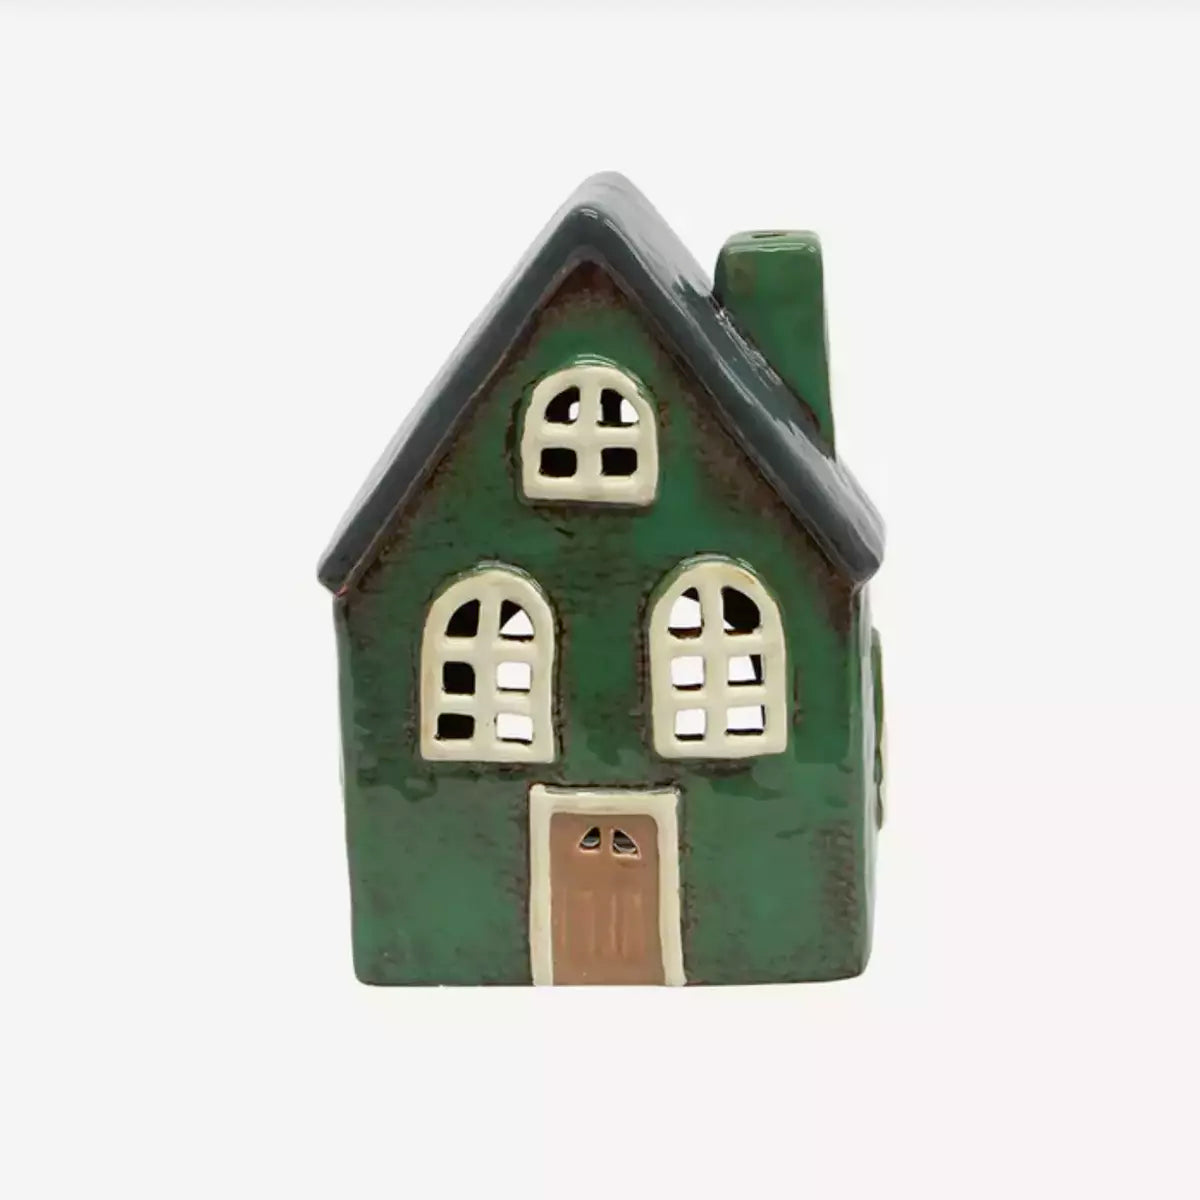 A small French Country Collections Christmas Village Barn - Green on a white background, decorated with tea lights for a cozy and festive Christmas village.